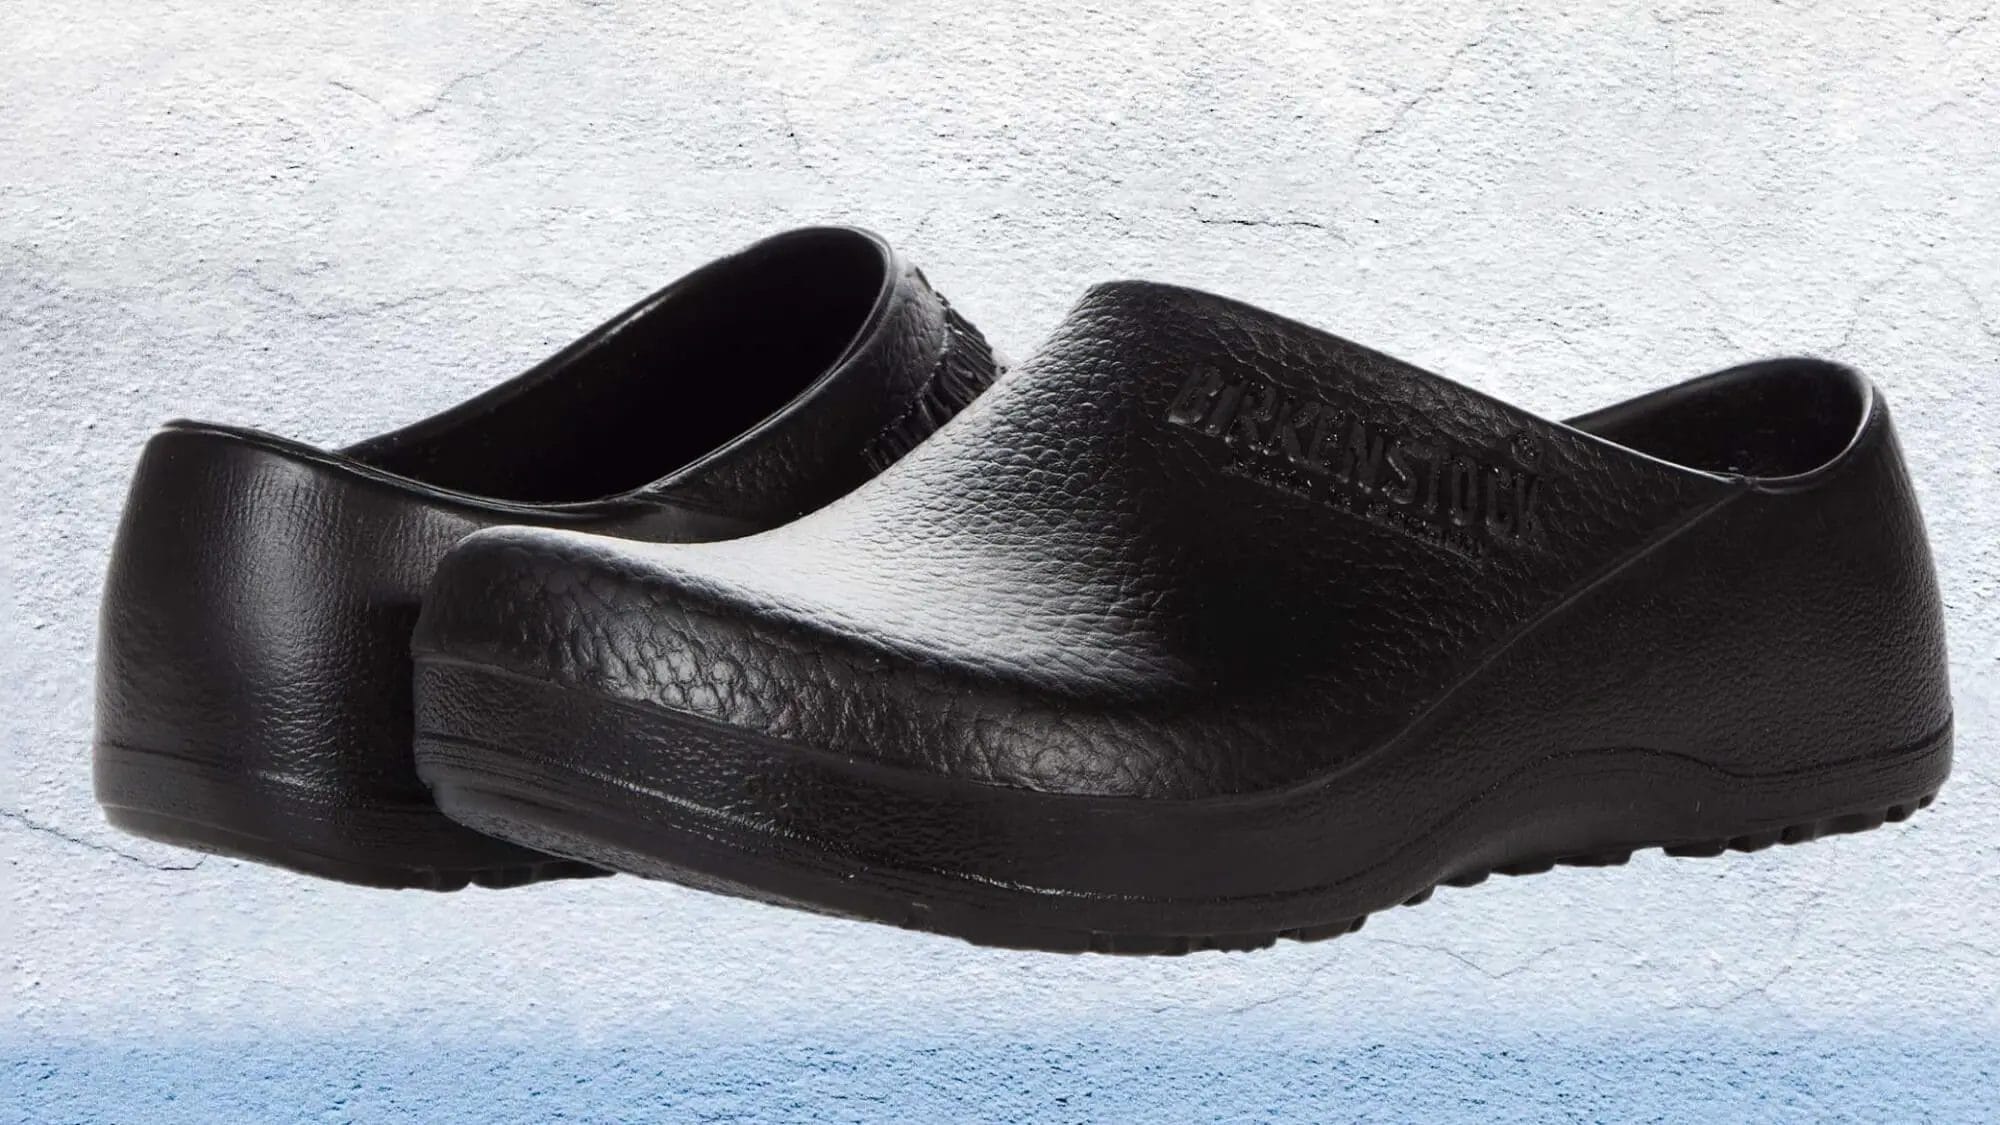 New Men Chef Shoes Black Kitchen Shoes Clog Non Slip Safety For Cook Shoes Hot 